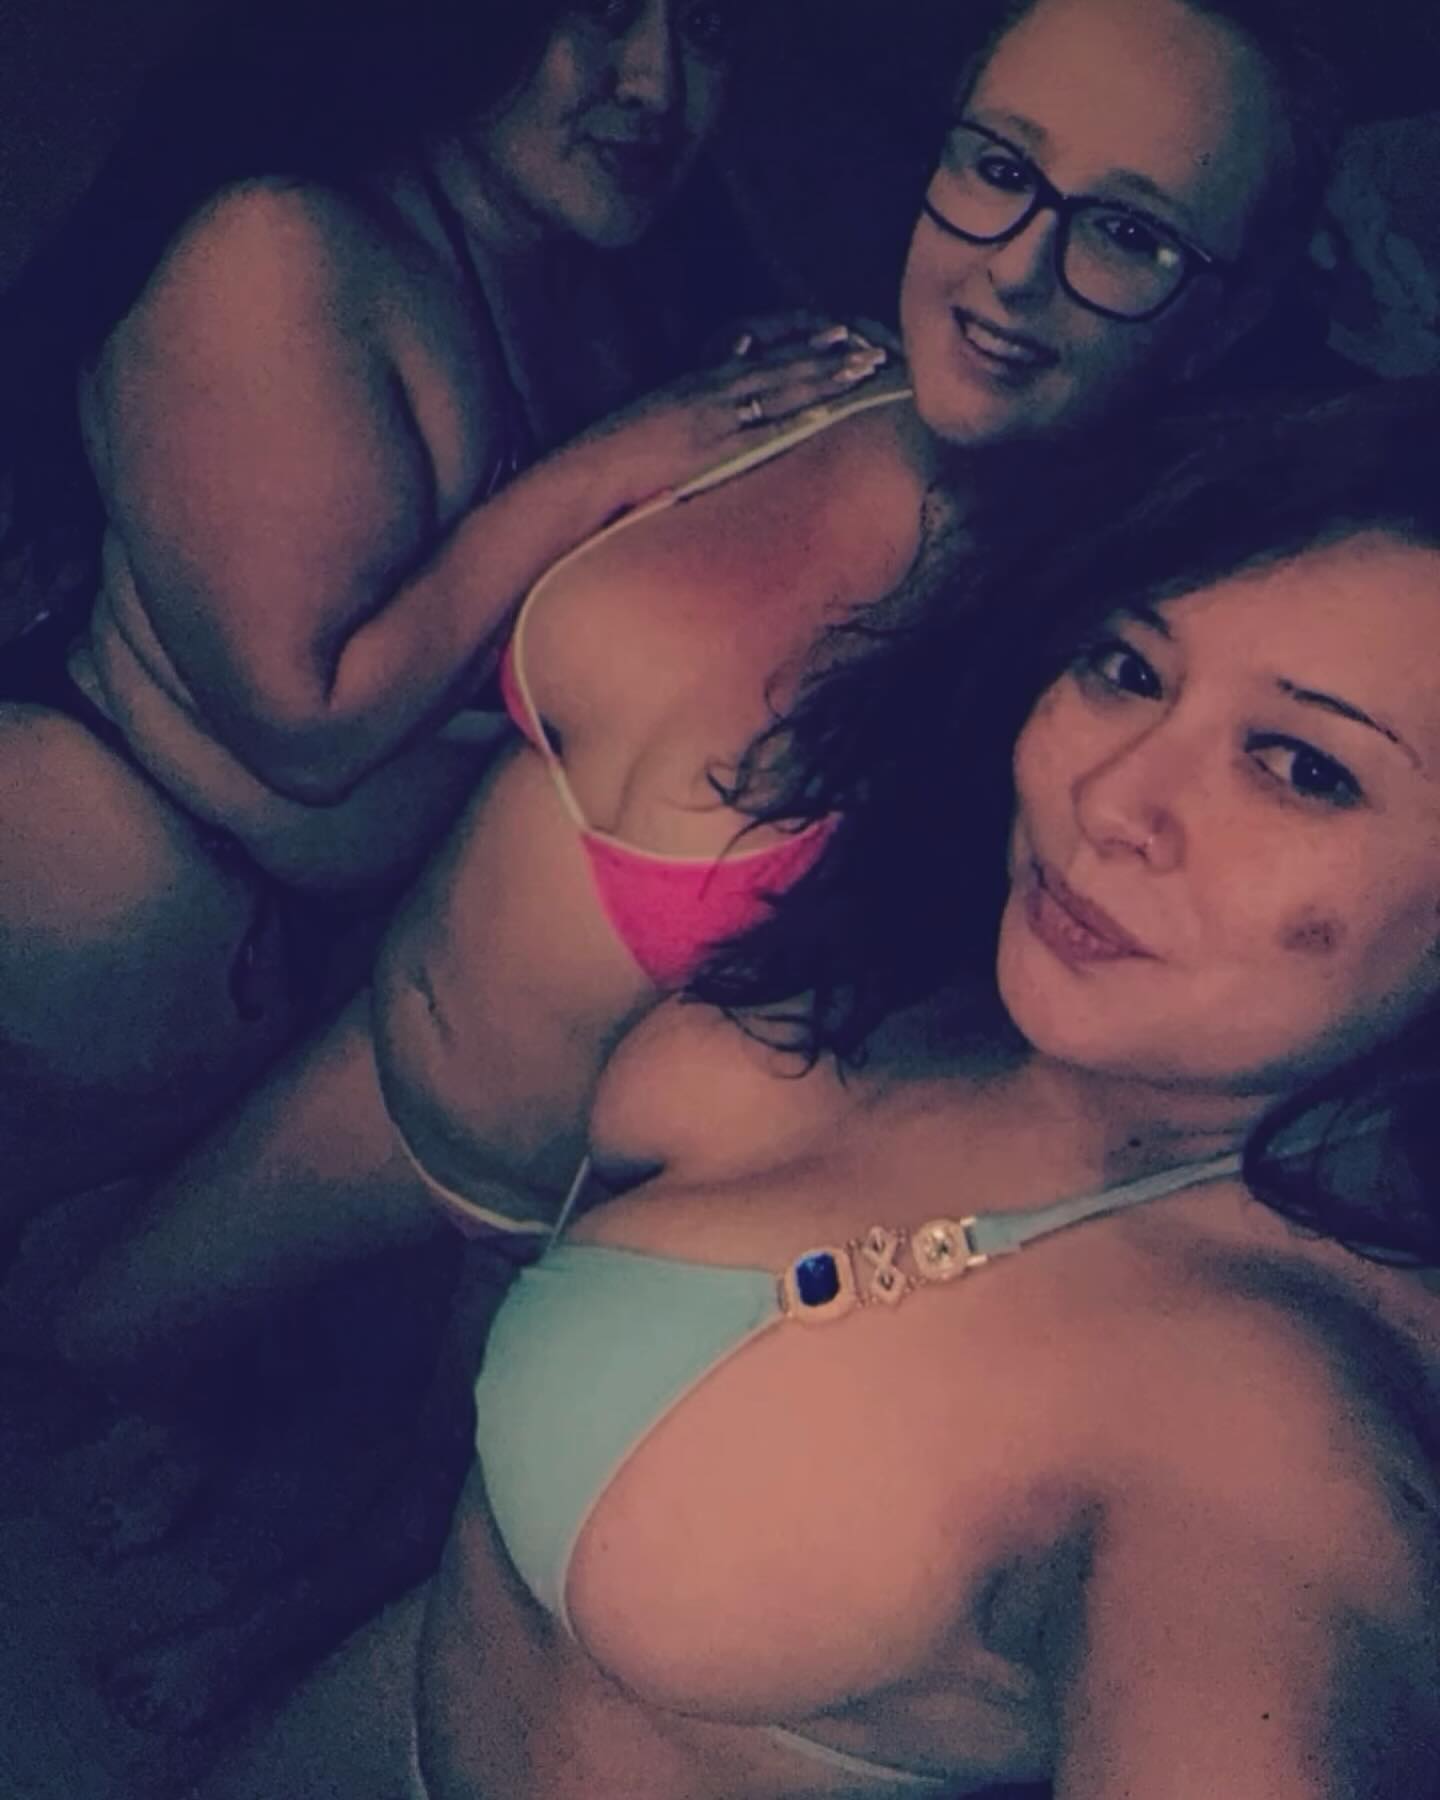 Had fun with my girls. Can’t wait for the pool parties this summer 💋🔥